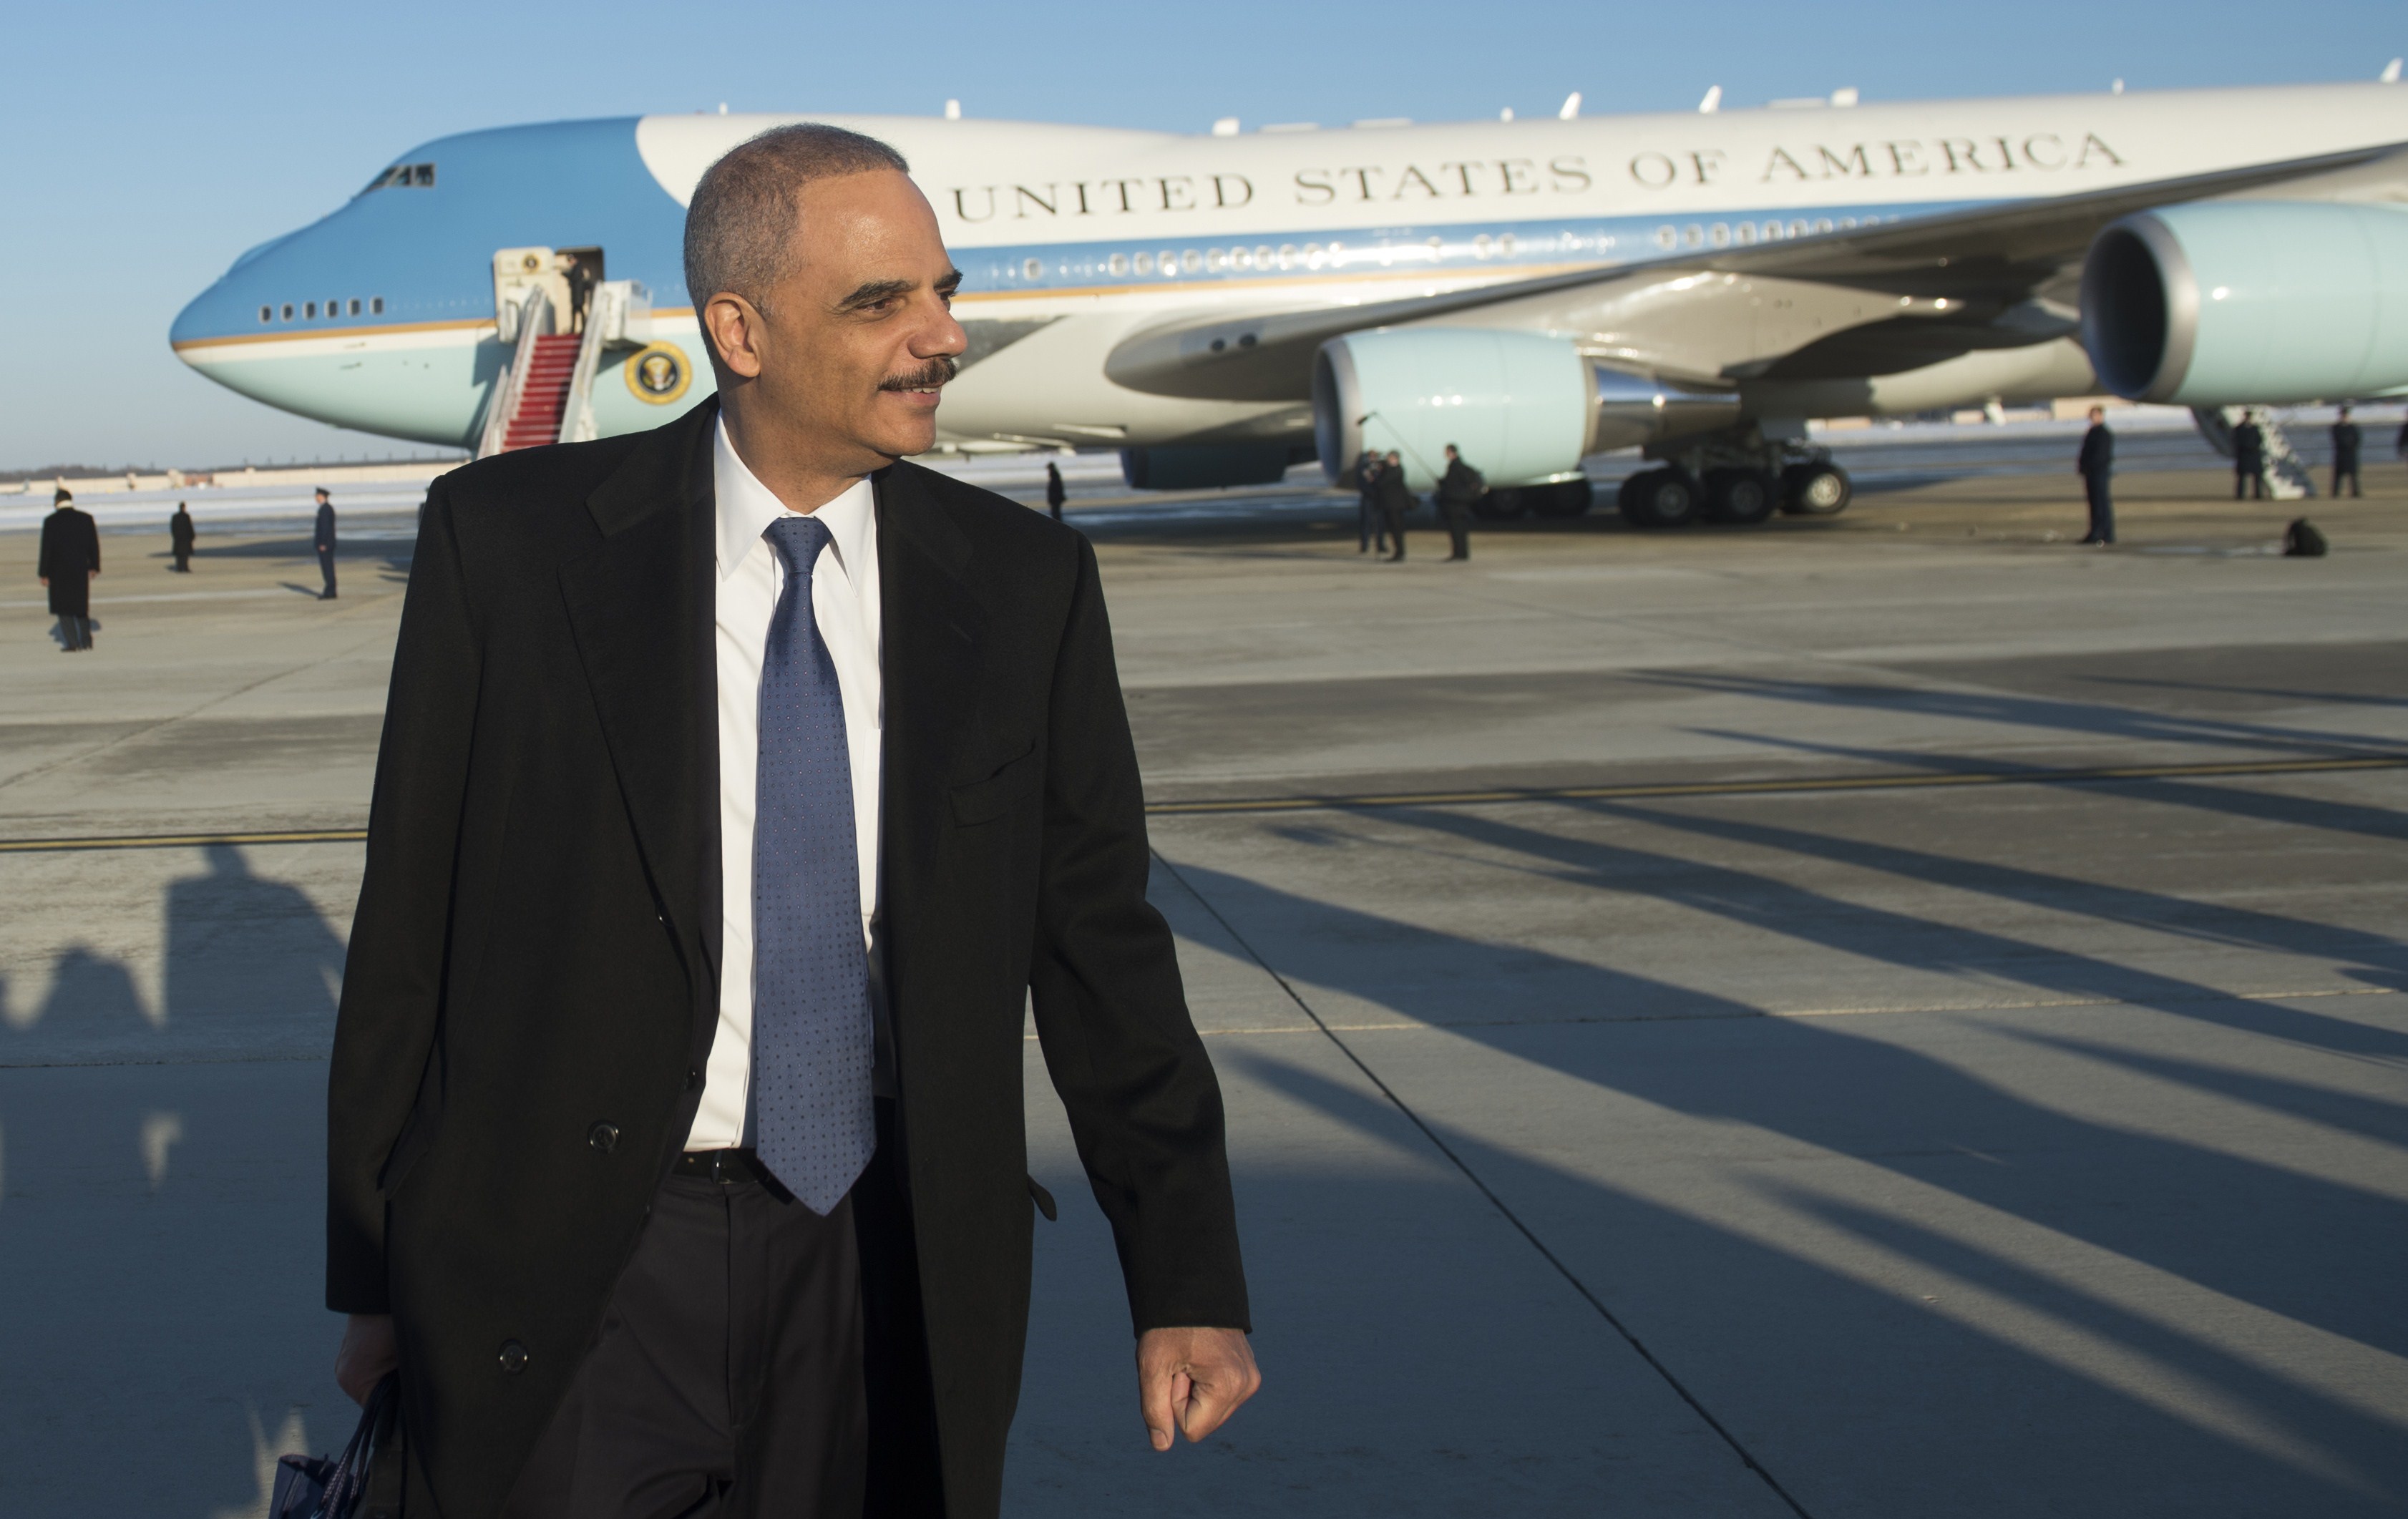 Attorney General Eric Holder walks from Air Force One after arriving with US President Barack Obama at Andrews Air Force Base in Maryland, March 6, 2015. (Saul Loeb—AFP/Getty Images)